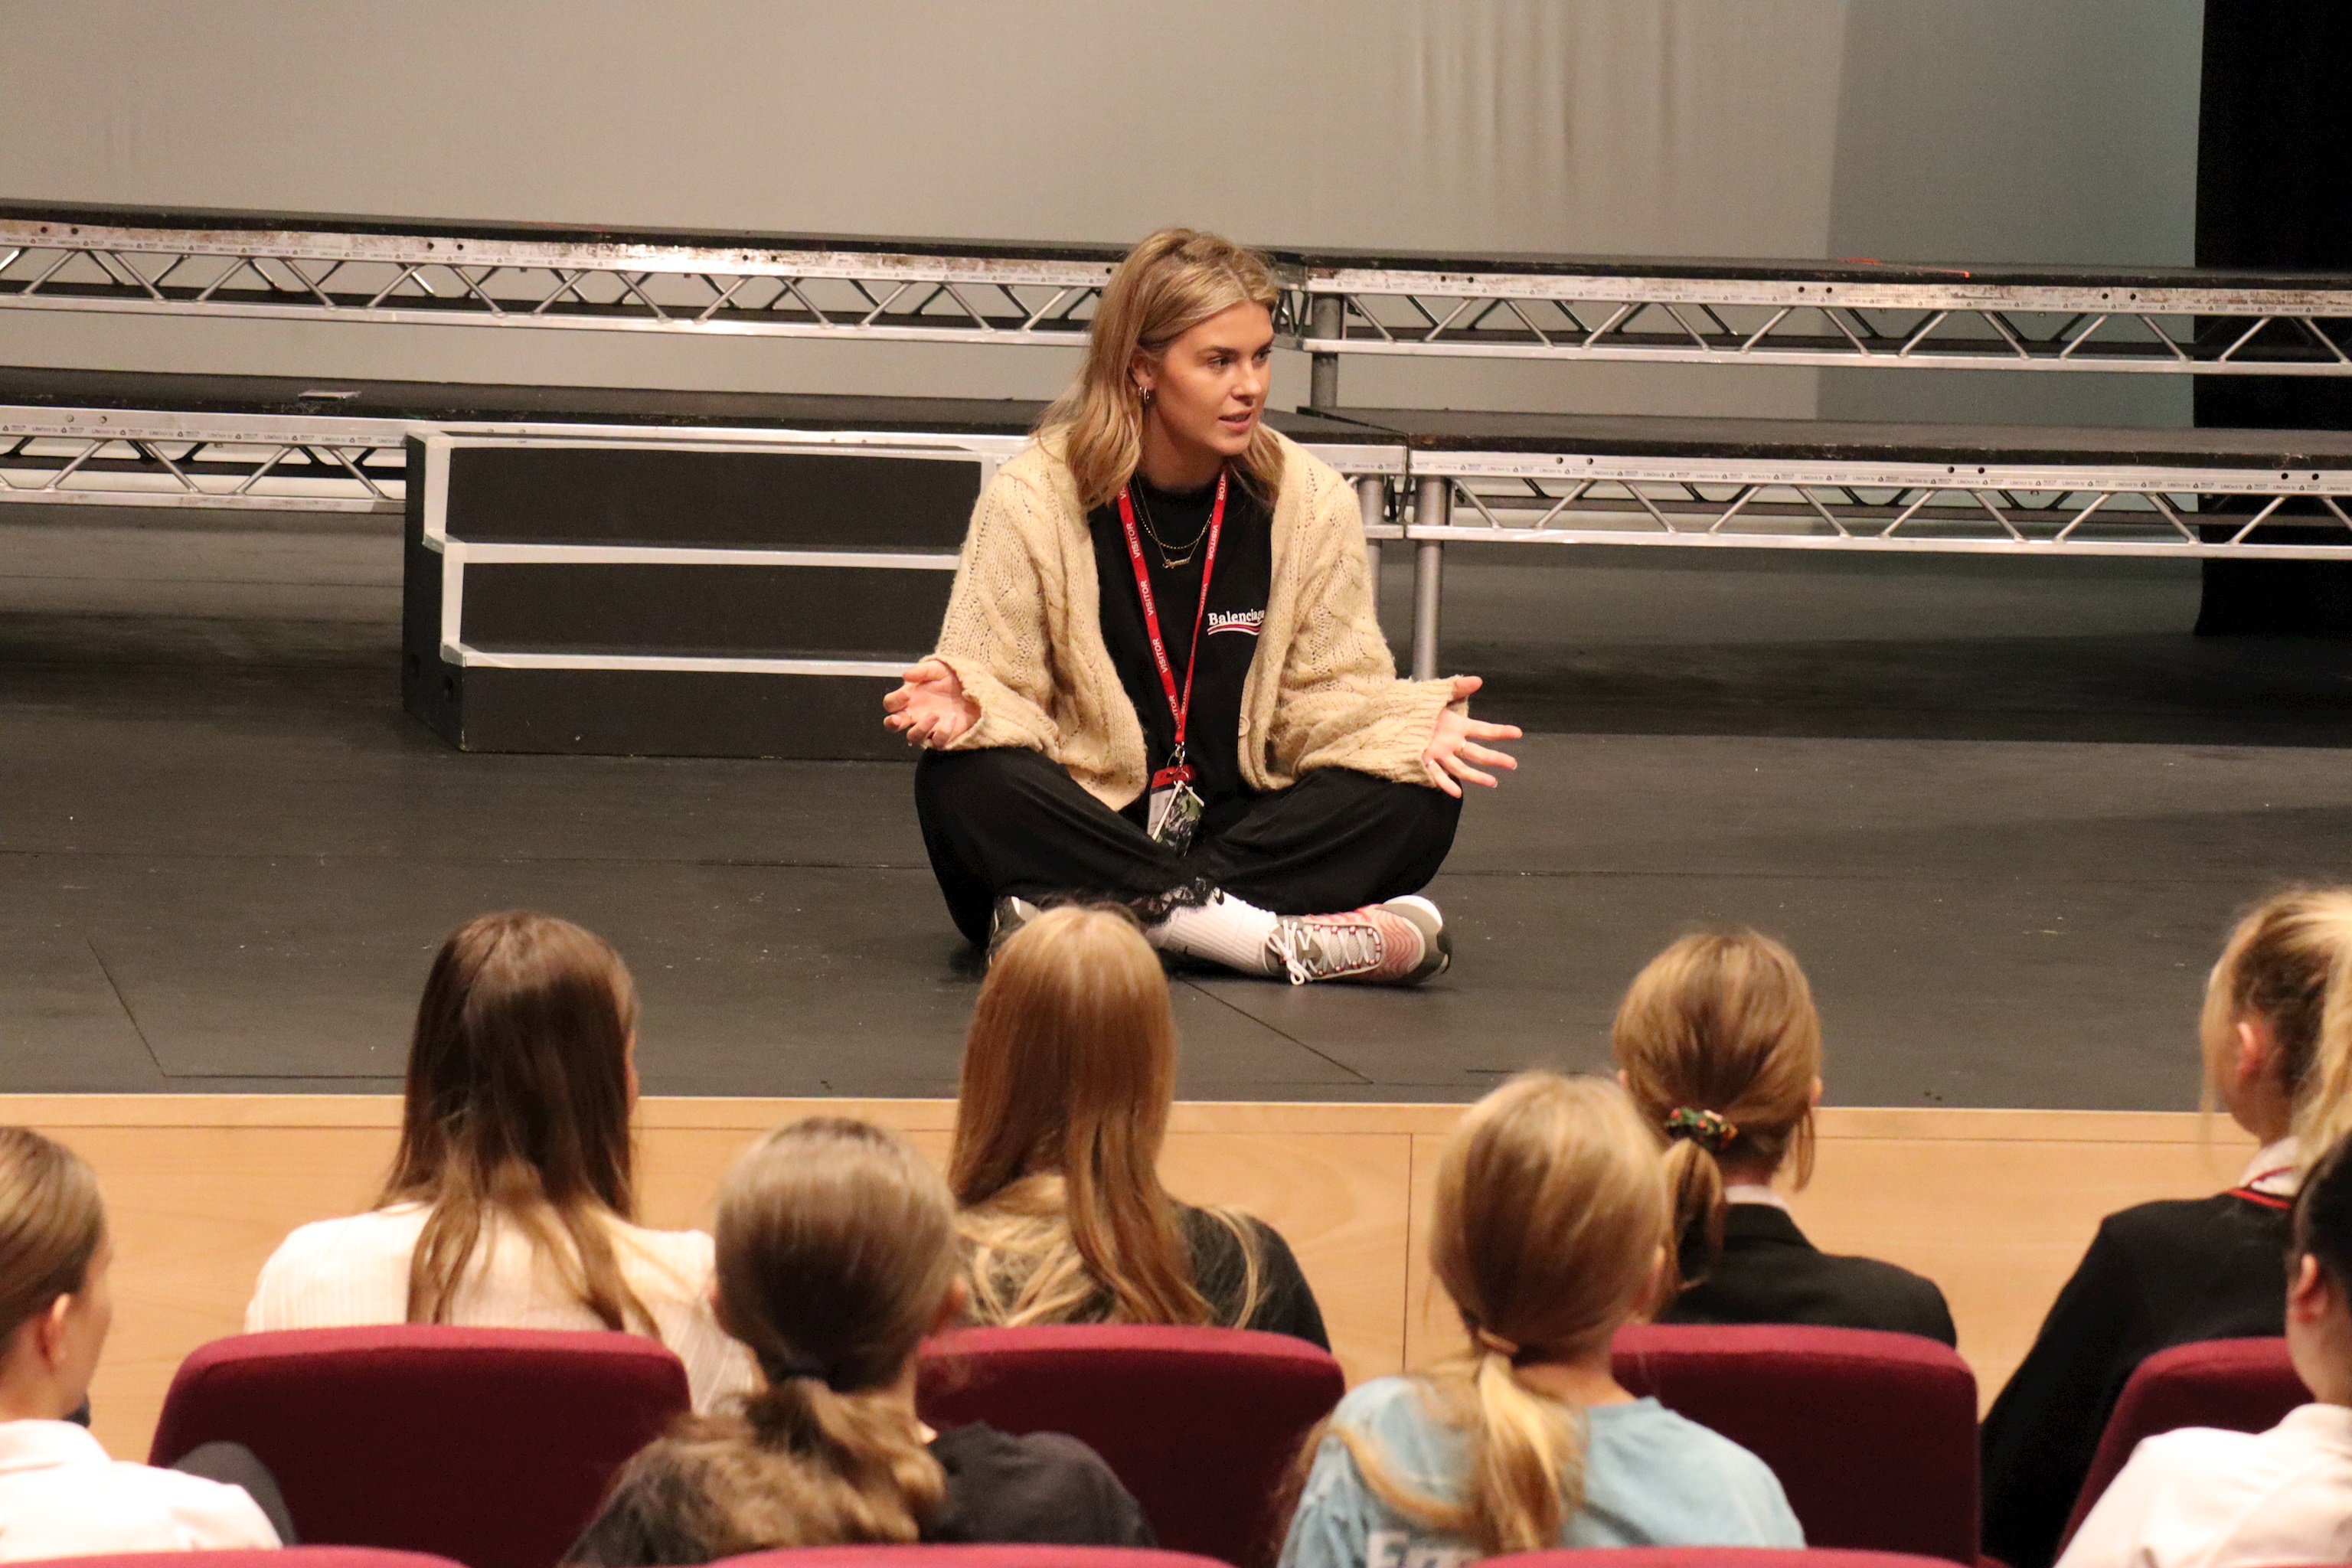 West-End Star gives Pipers students a very special drama workshop